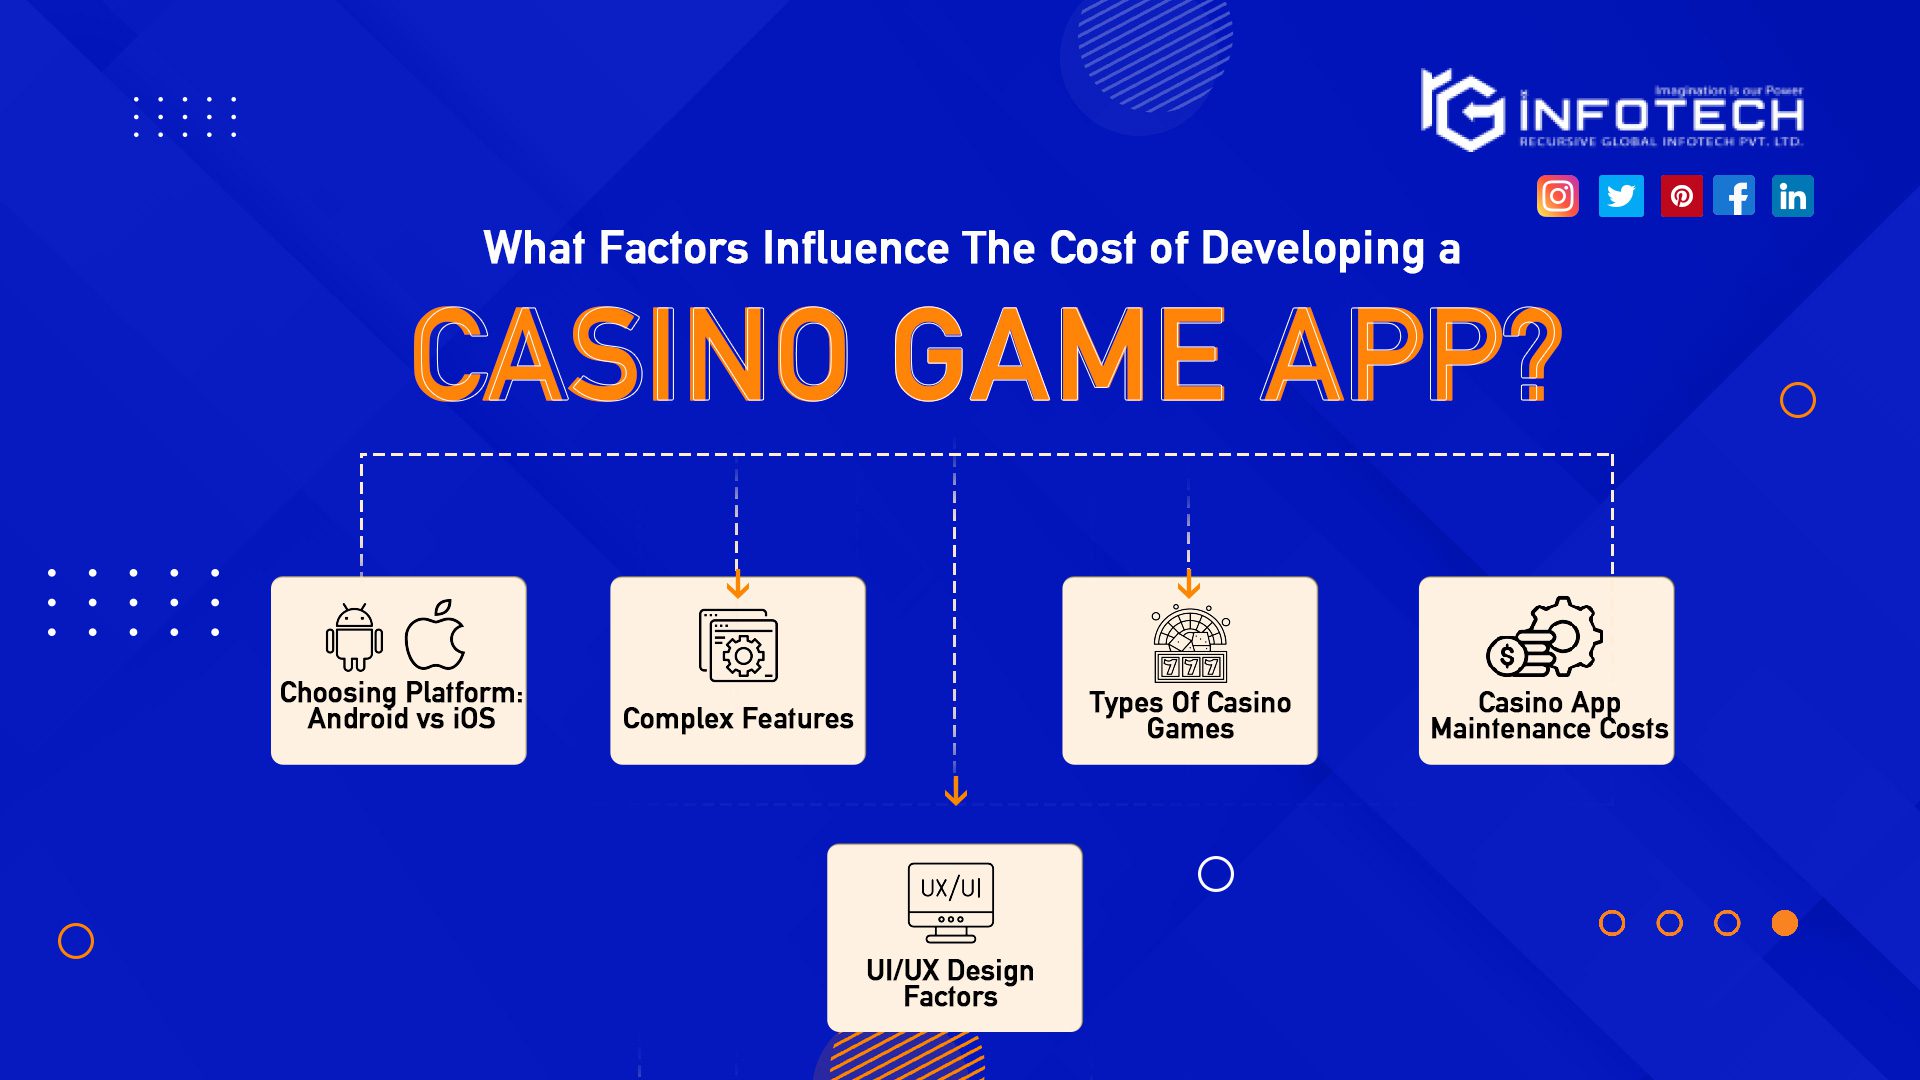 What Factors Influence The Cost to Develop A Casino Game App?